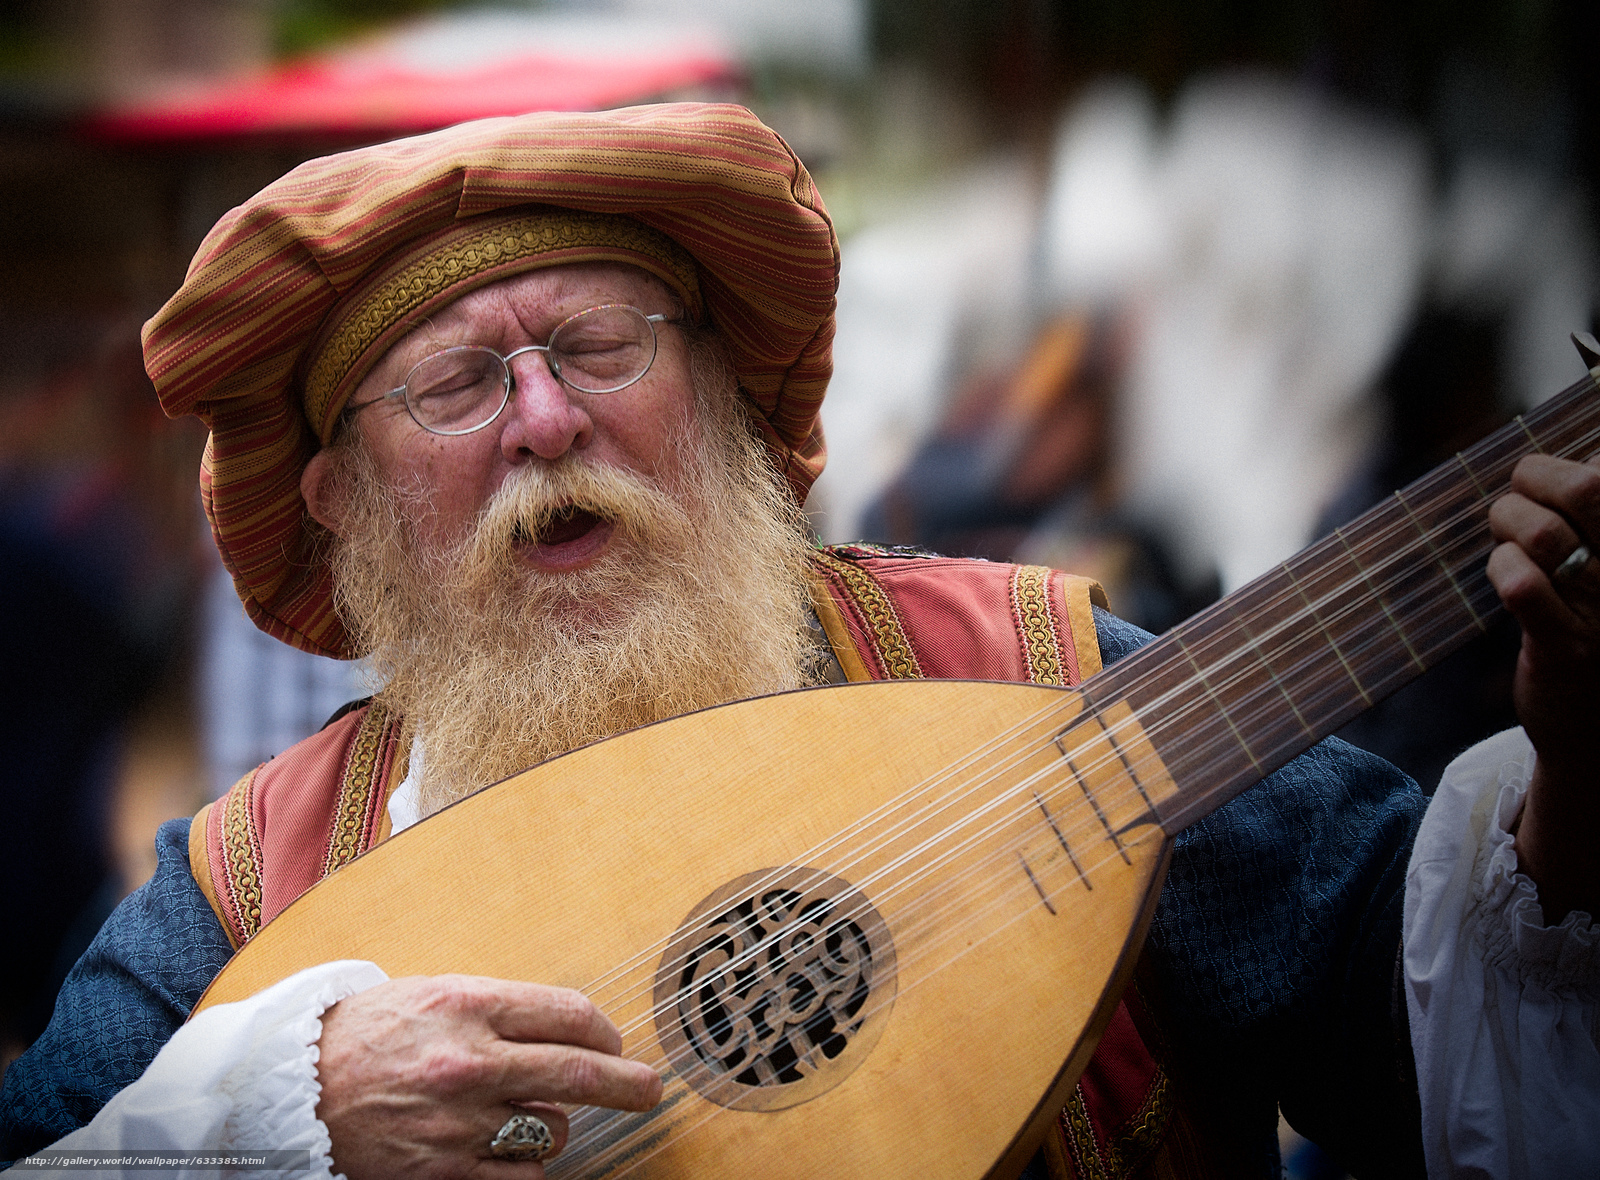 Download Wallpaper Lute, Musical Instrument, Old Man, - Man With A Lute - HD Wallpaper 